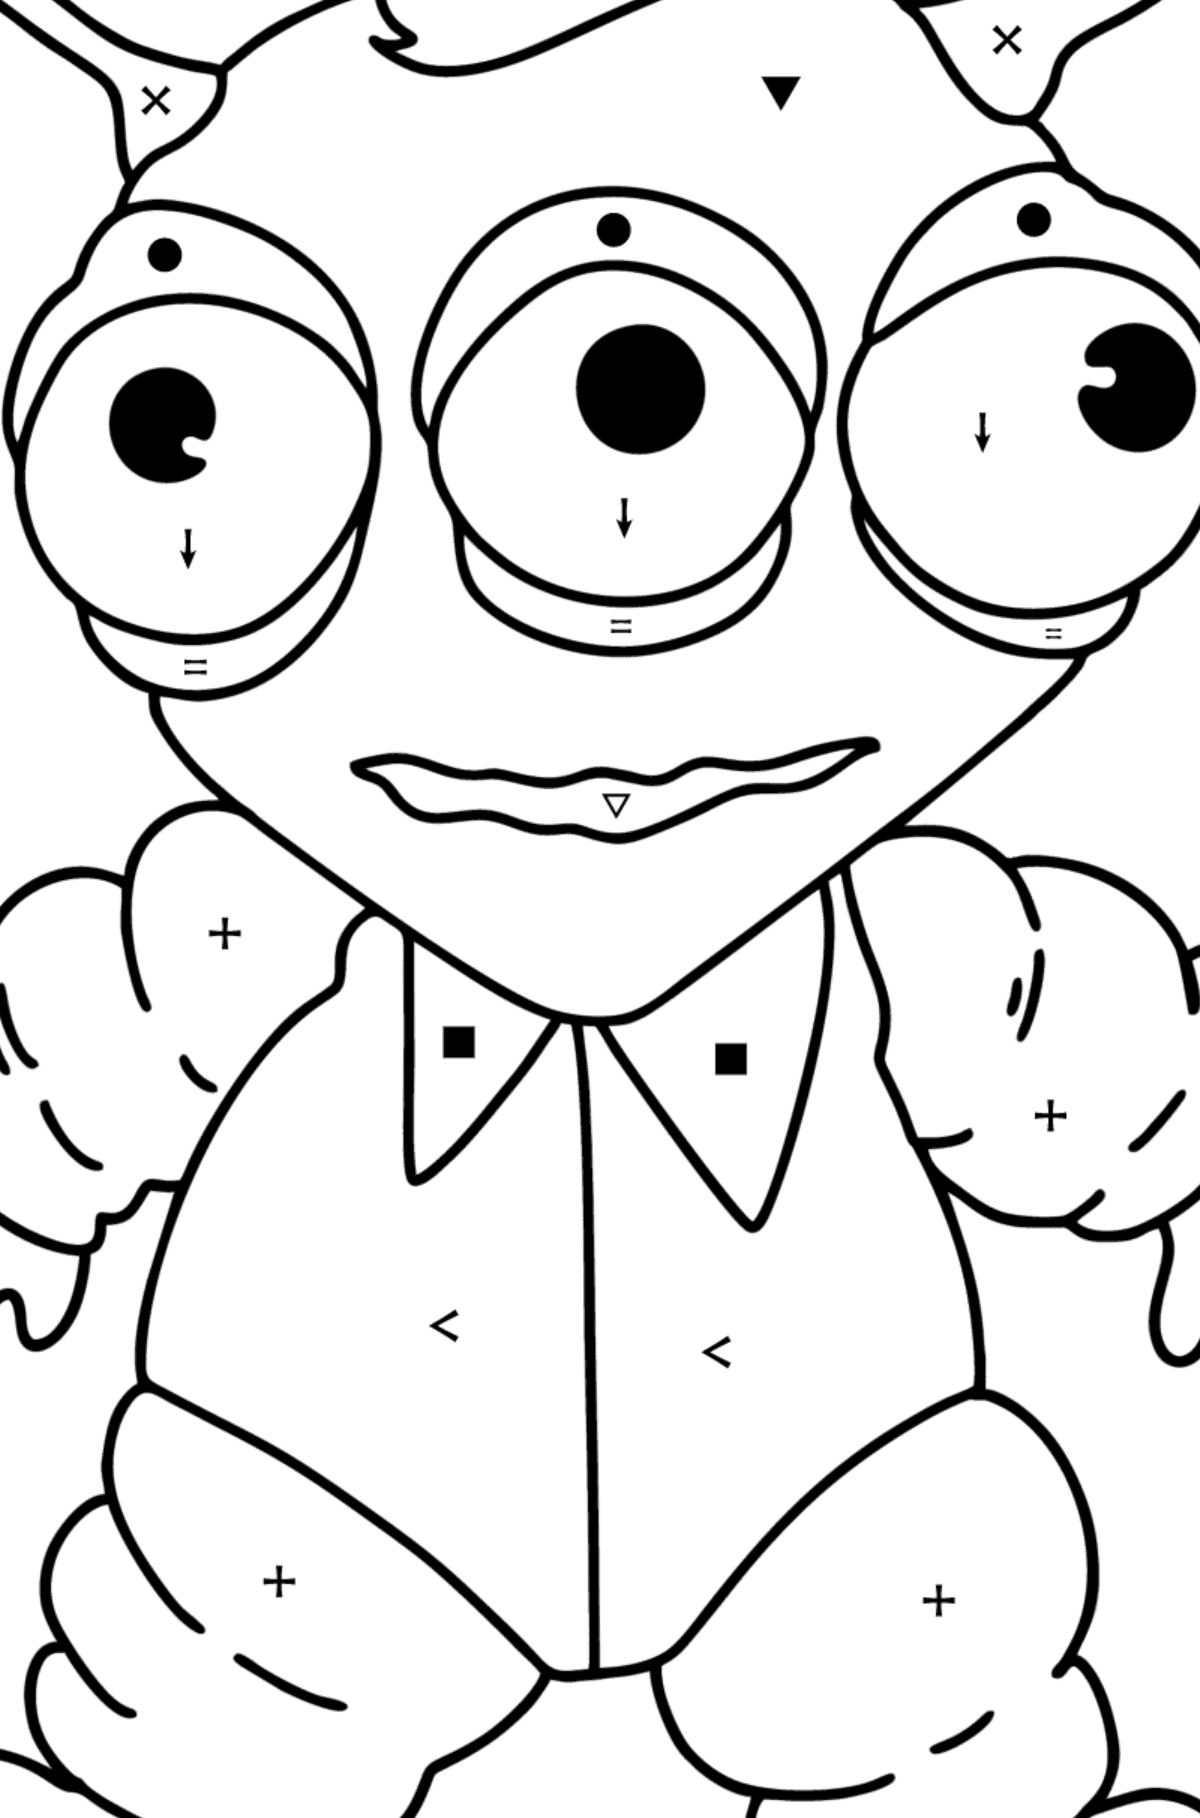 Cartoon Alien Coloring page - Coloring by Symbols for Kids